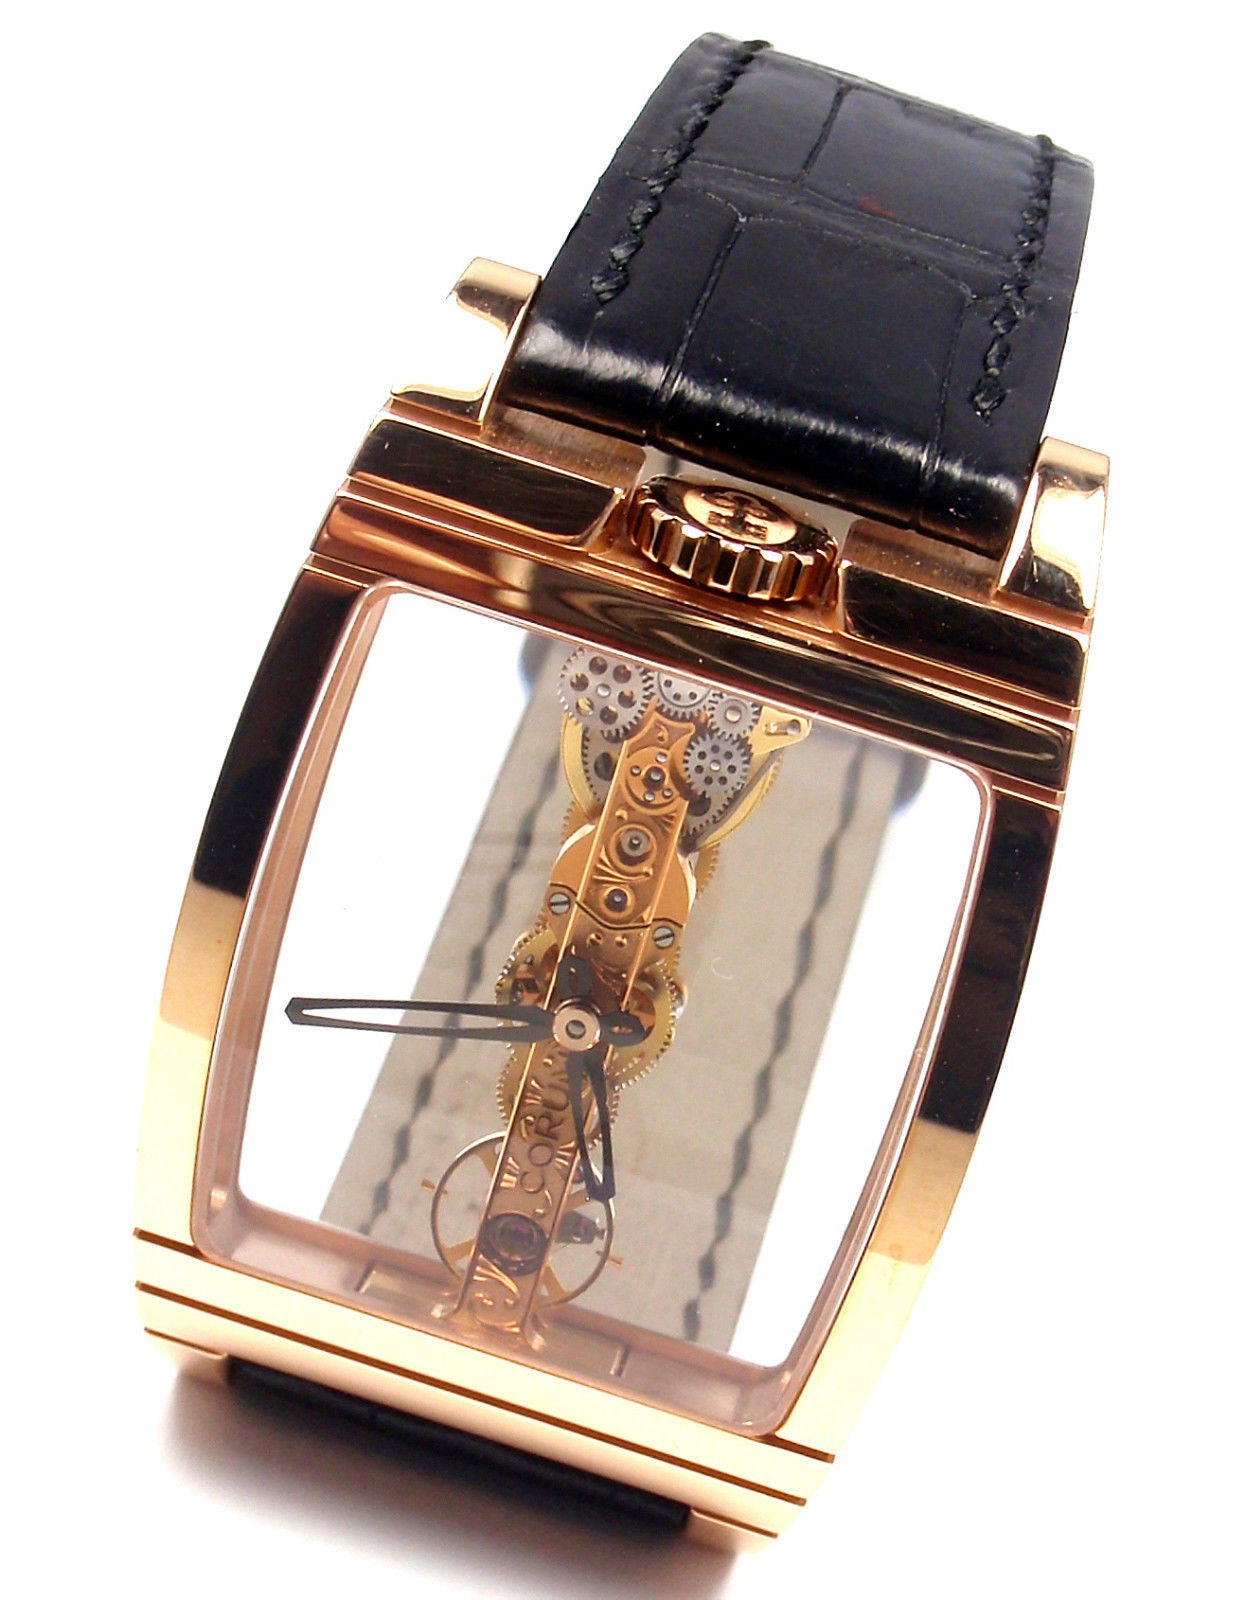 18k Rose Gold Golden Bridge Mens Watch Reference 113.750.55 by Corum

Details:
Brand: Corum
Model: Golden Bridge
Model Number: 113.750.55
Case: 18k rose gold curved tonneau case with sapphire crystal panels on both sides to view with visible